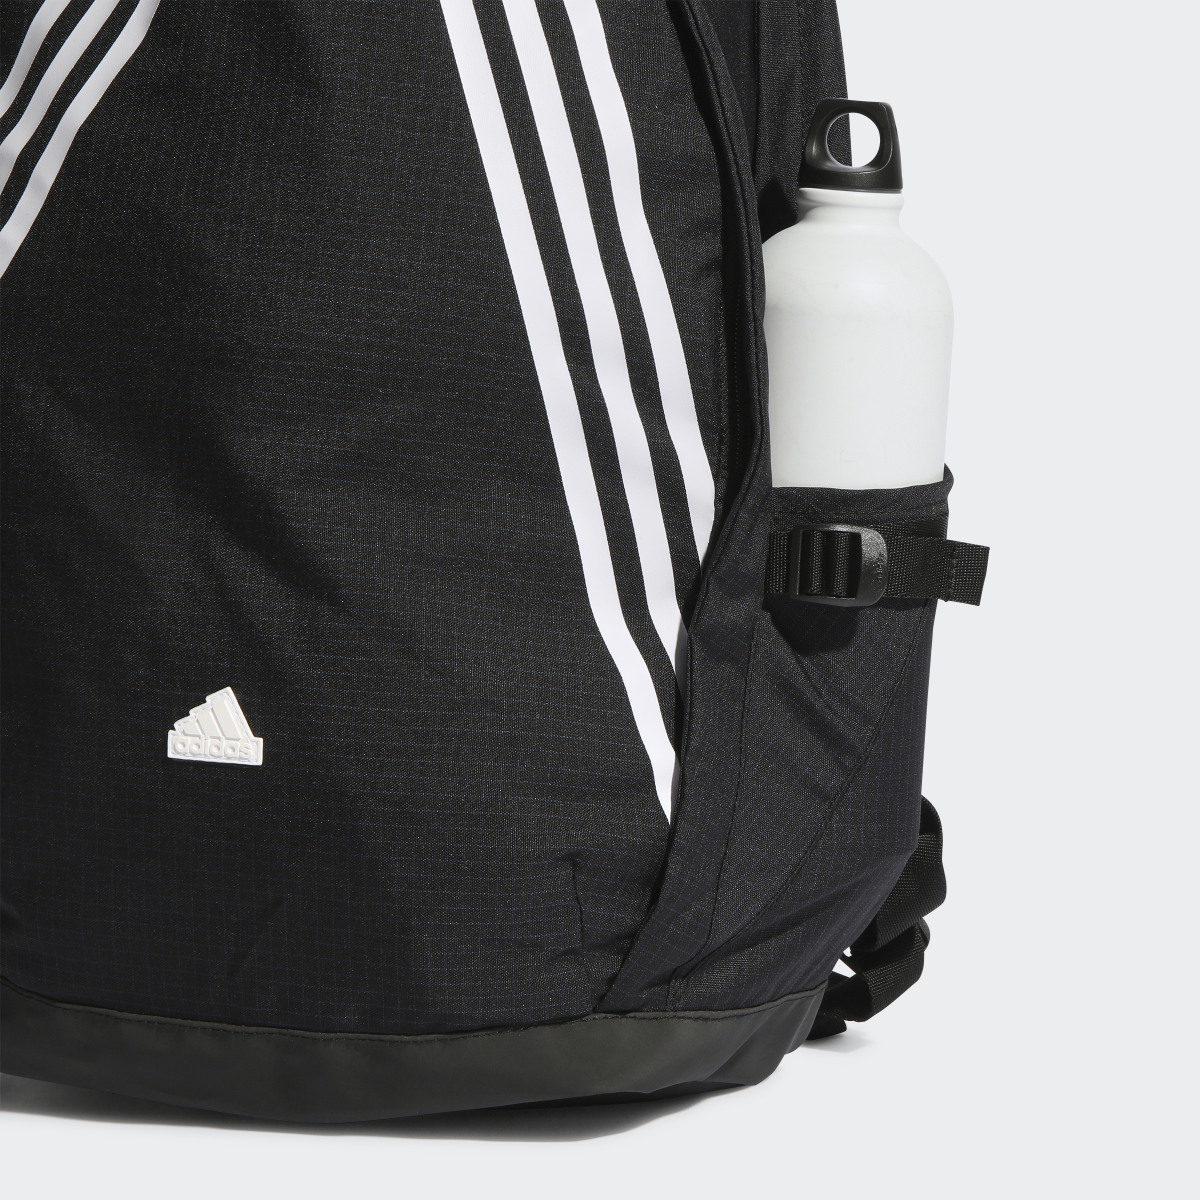 Adidas Back to School Backpack. 6